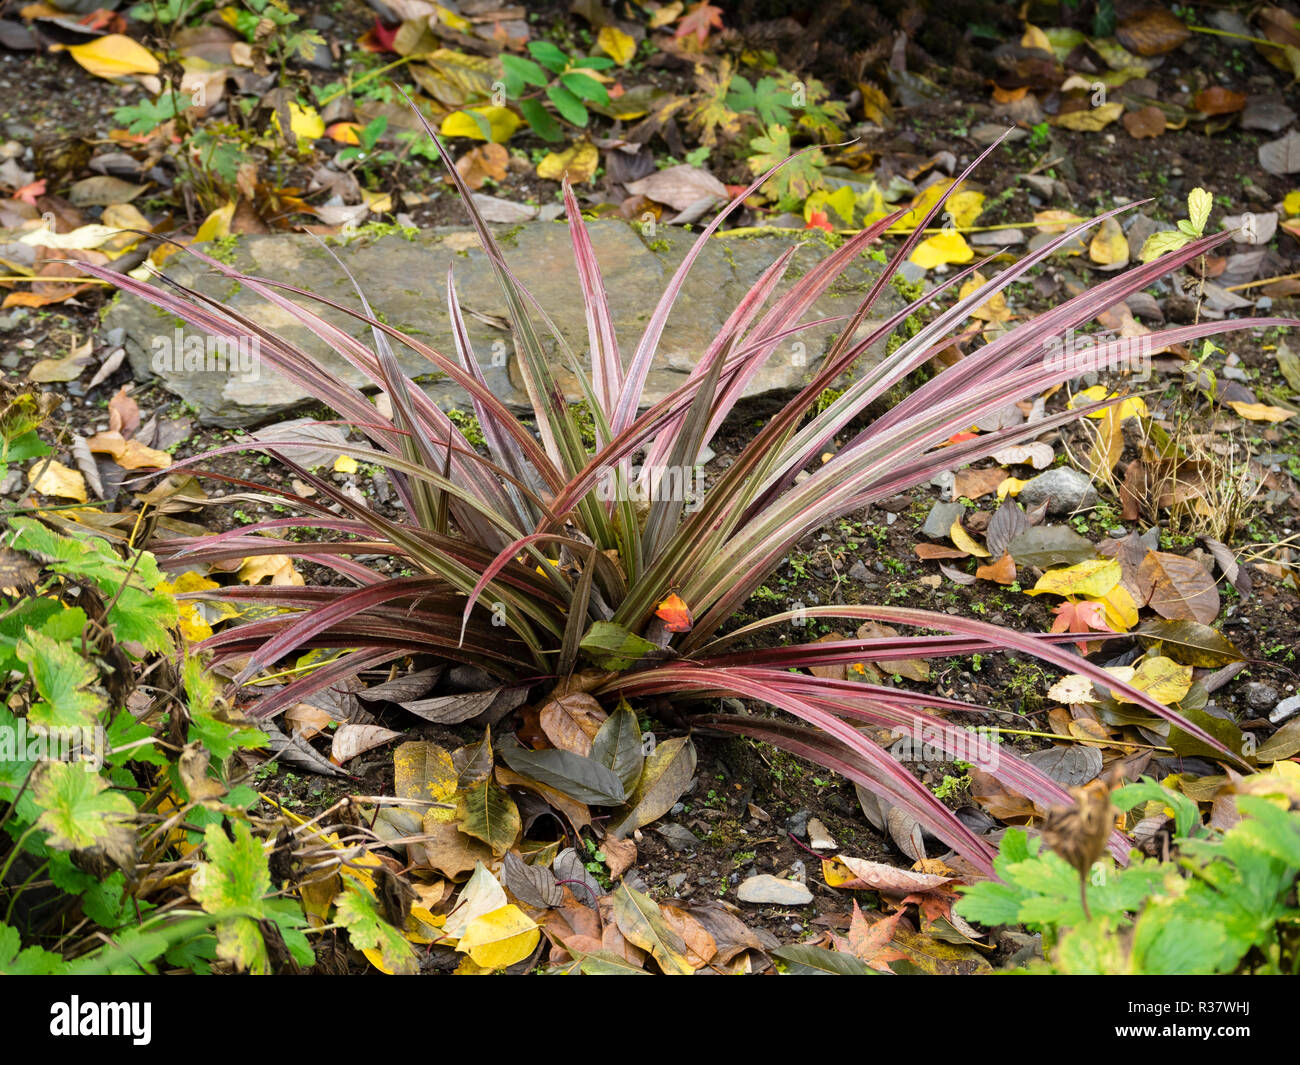 Silver and red foliage of the evergreen, tussock forming New Zealand plant, Astelia 'Red Devil' Stock Photo